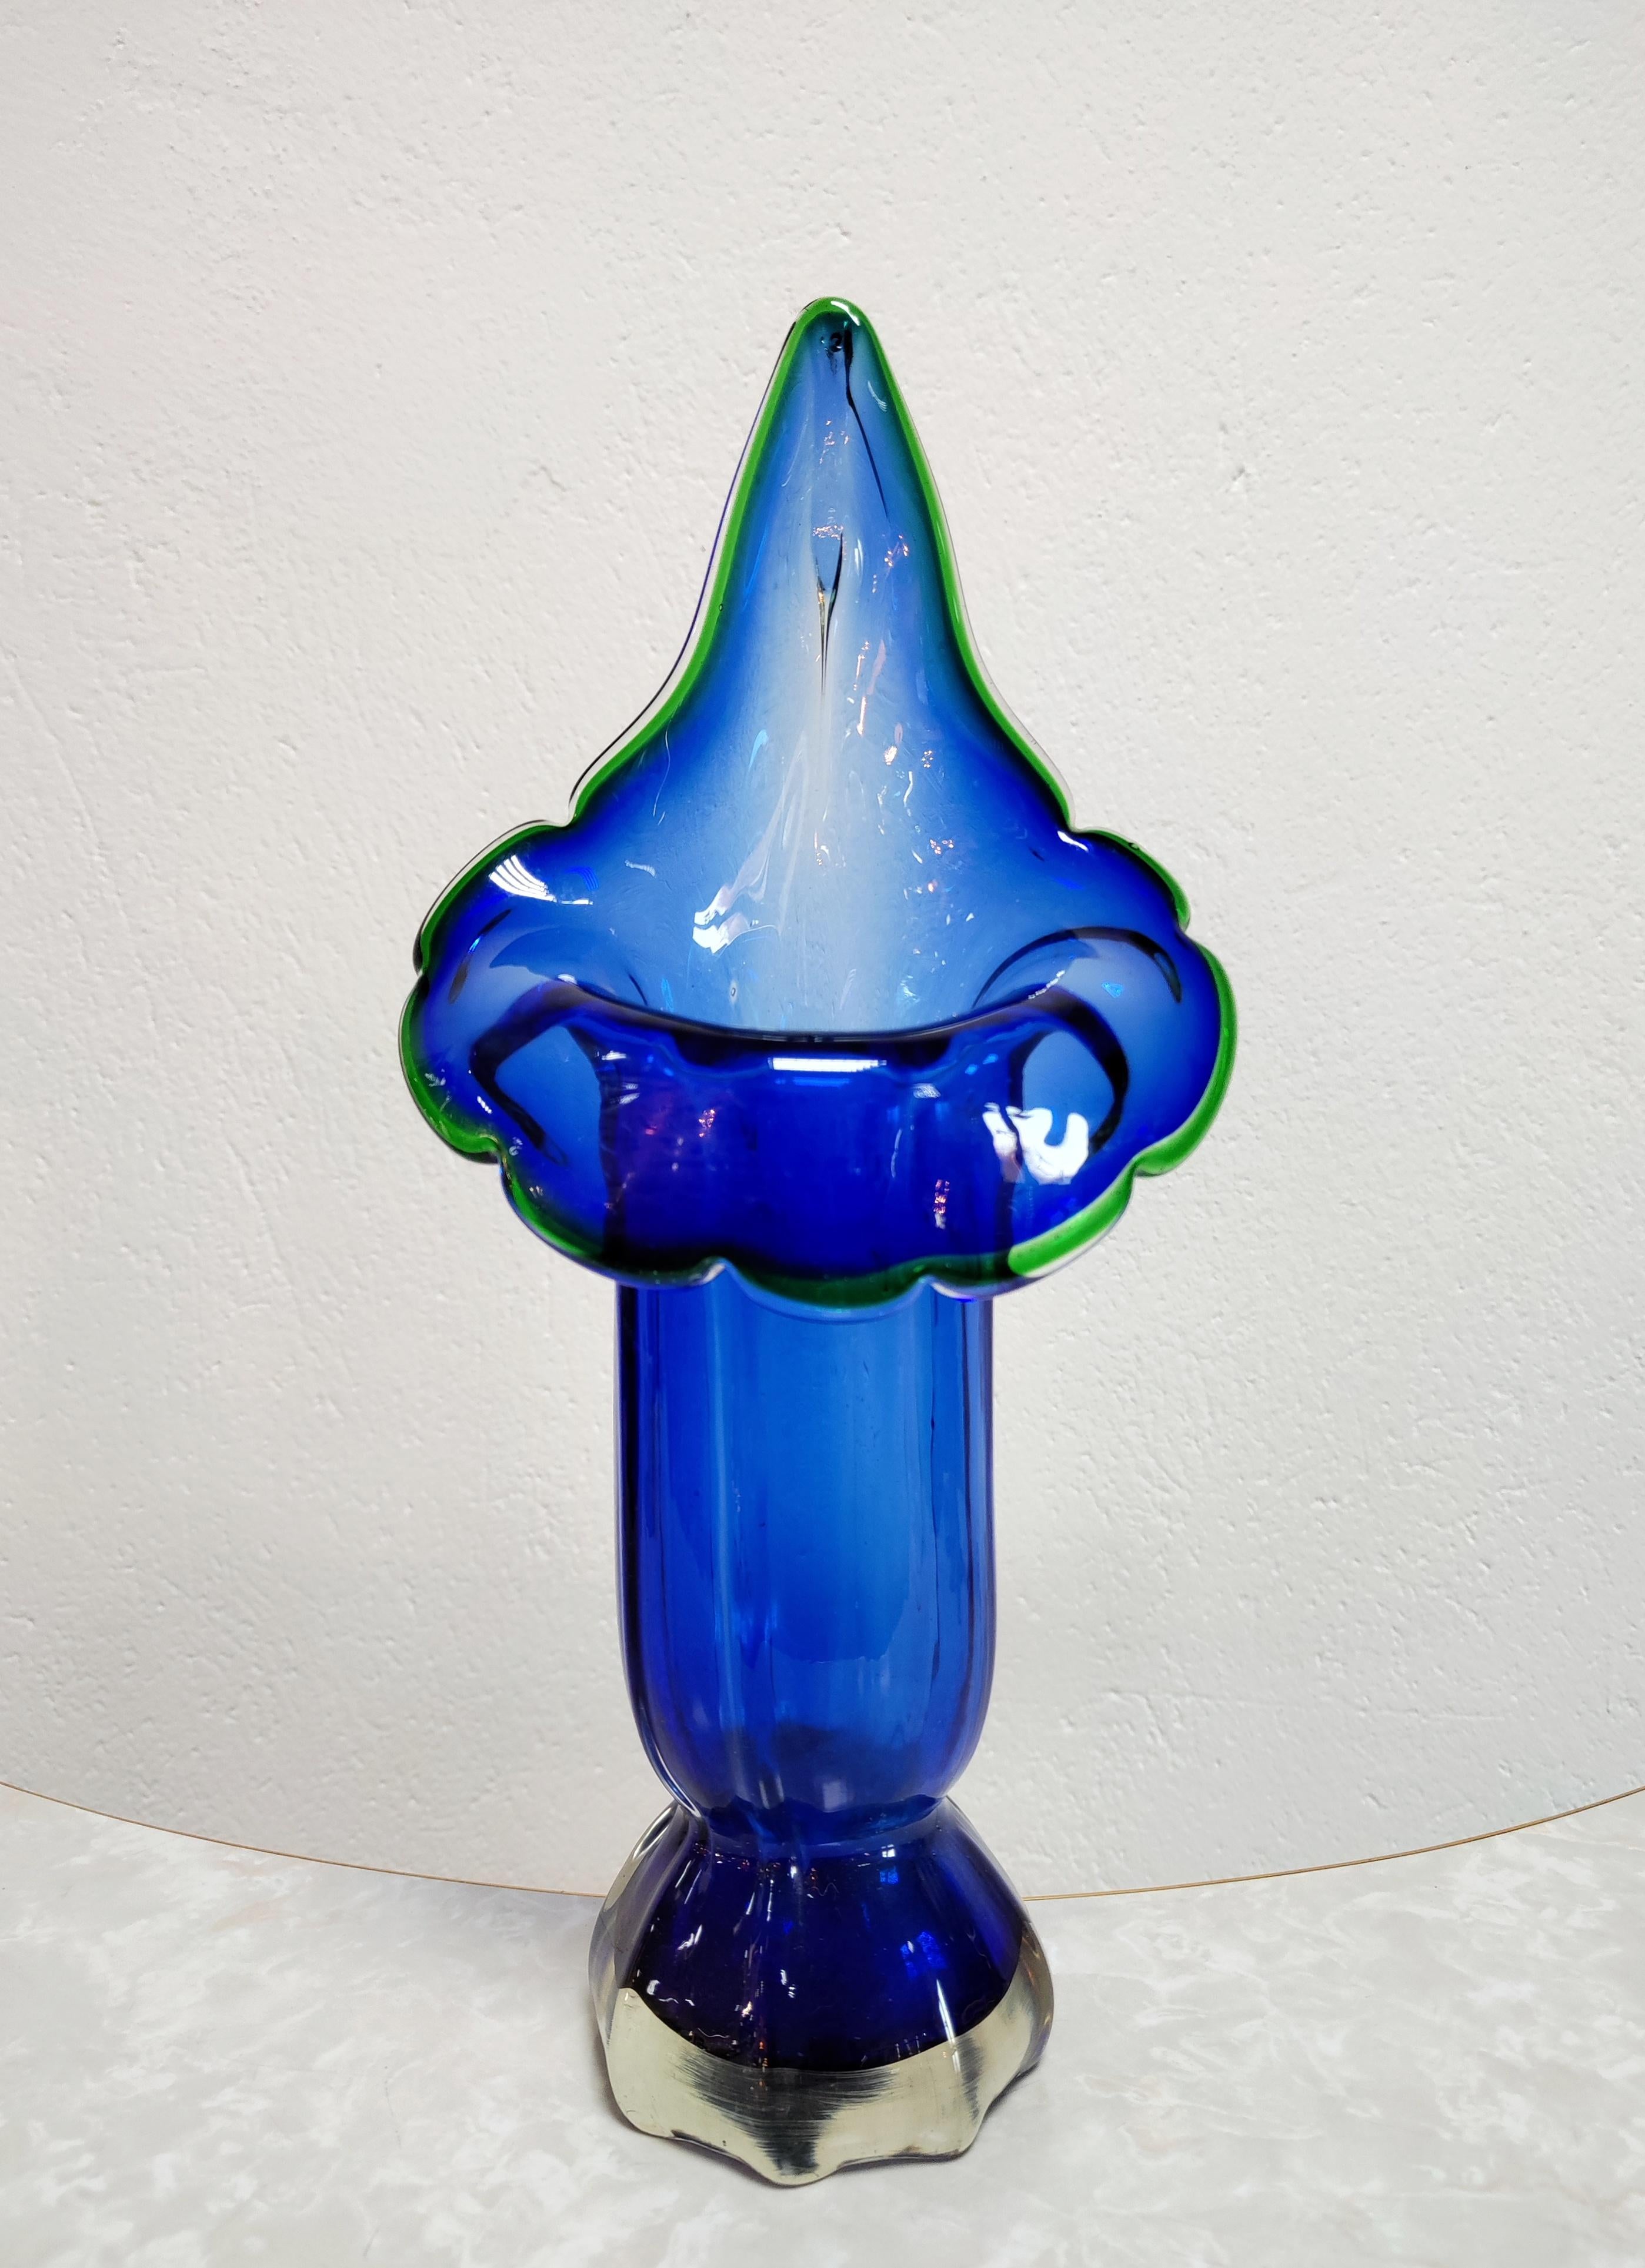 Italian Blue Mid-Century Modern Murano Glass Vase Shaped as Calla Lily, Italy, 1960s For Sale